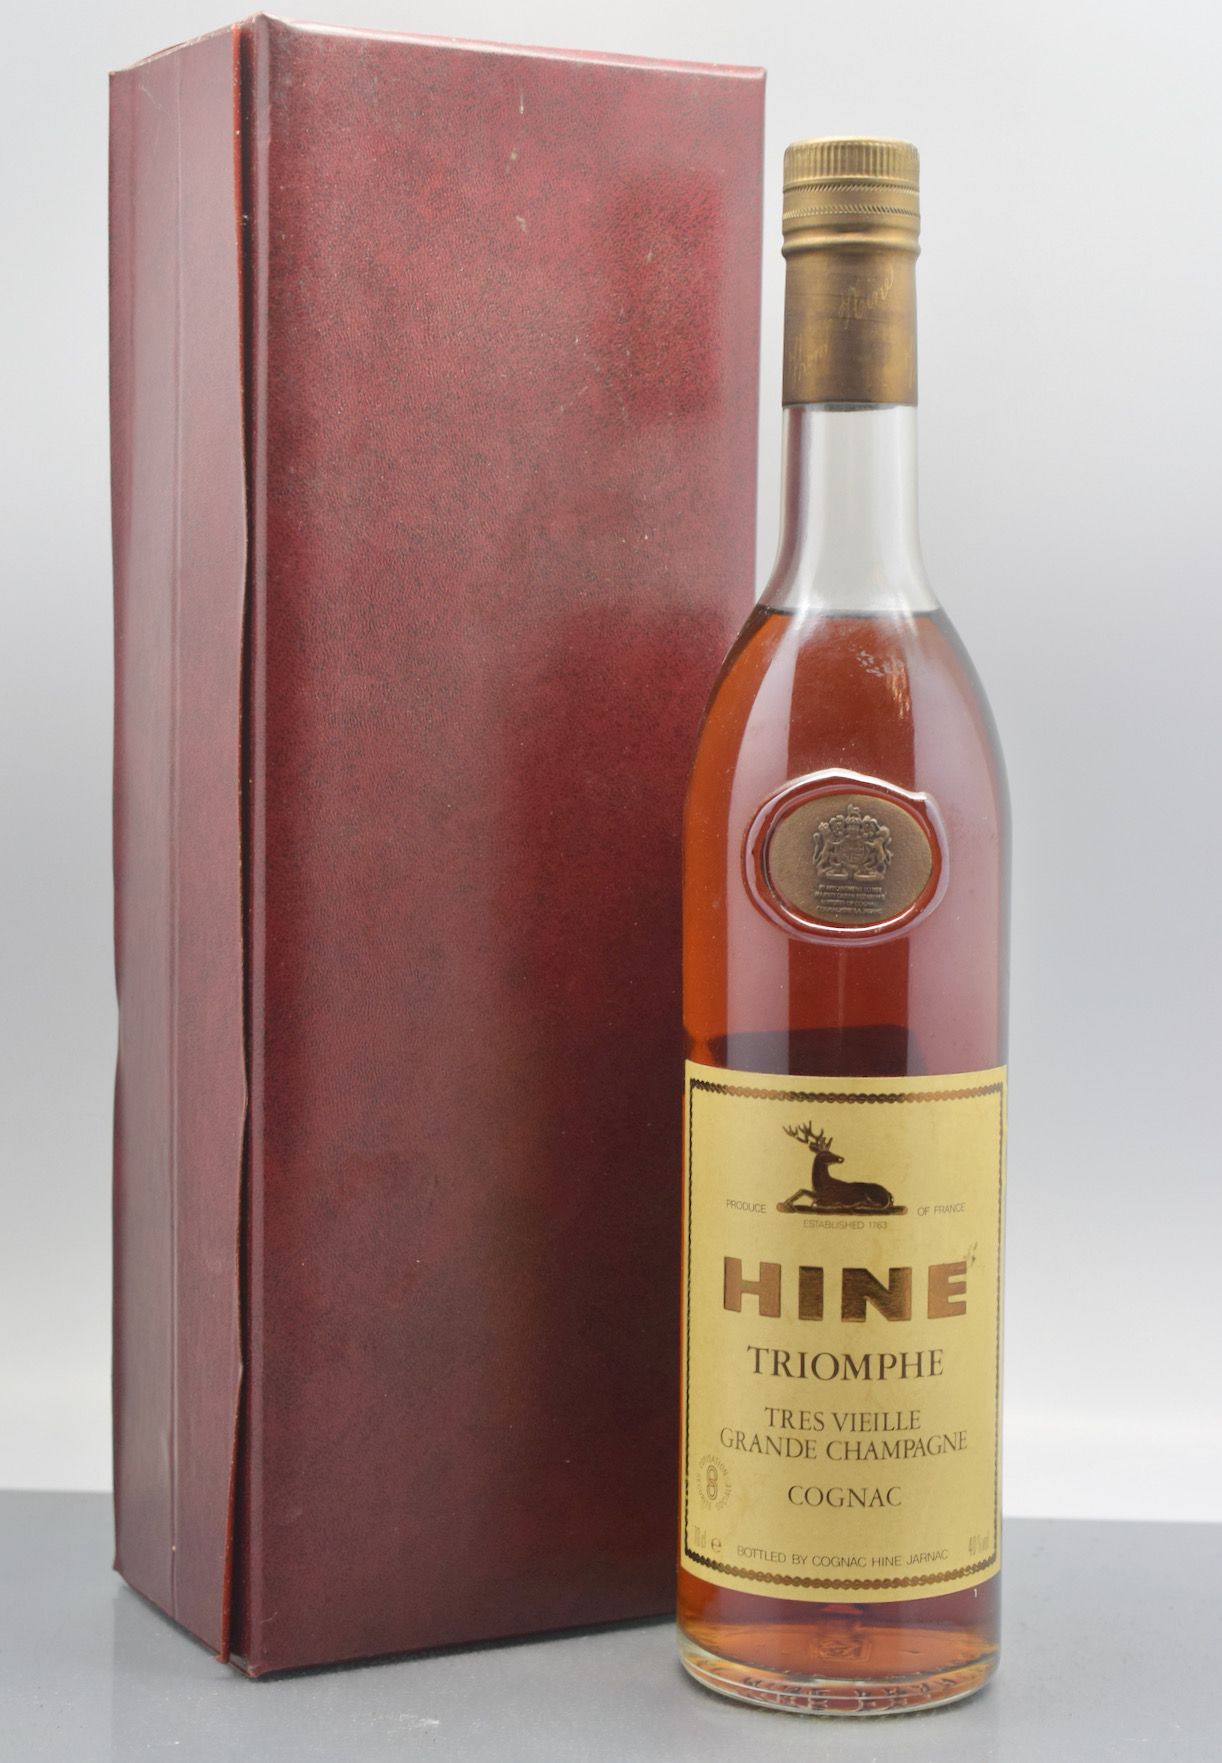 Null 1 bottle COGNAC "Triomphe", Hine (Very old Grande Champagne, elt) in box